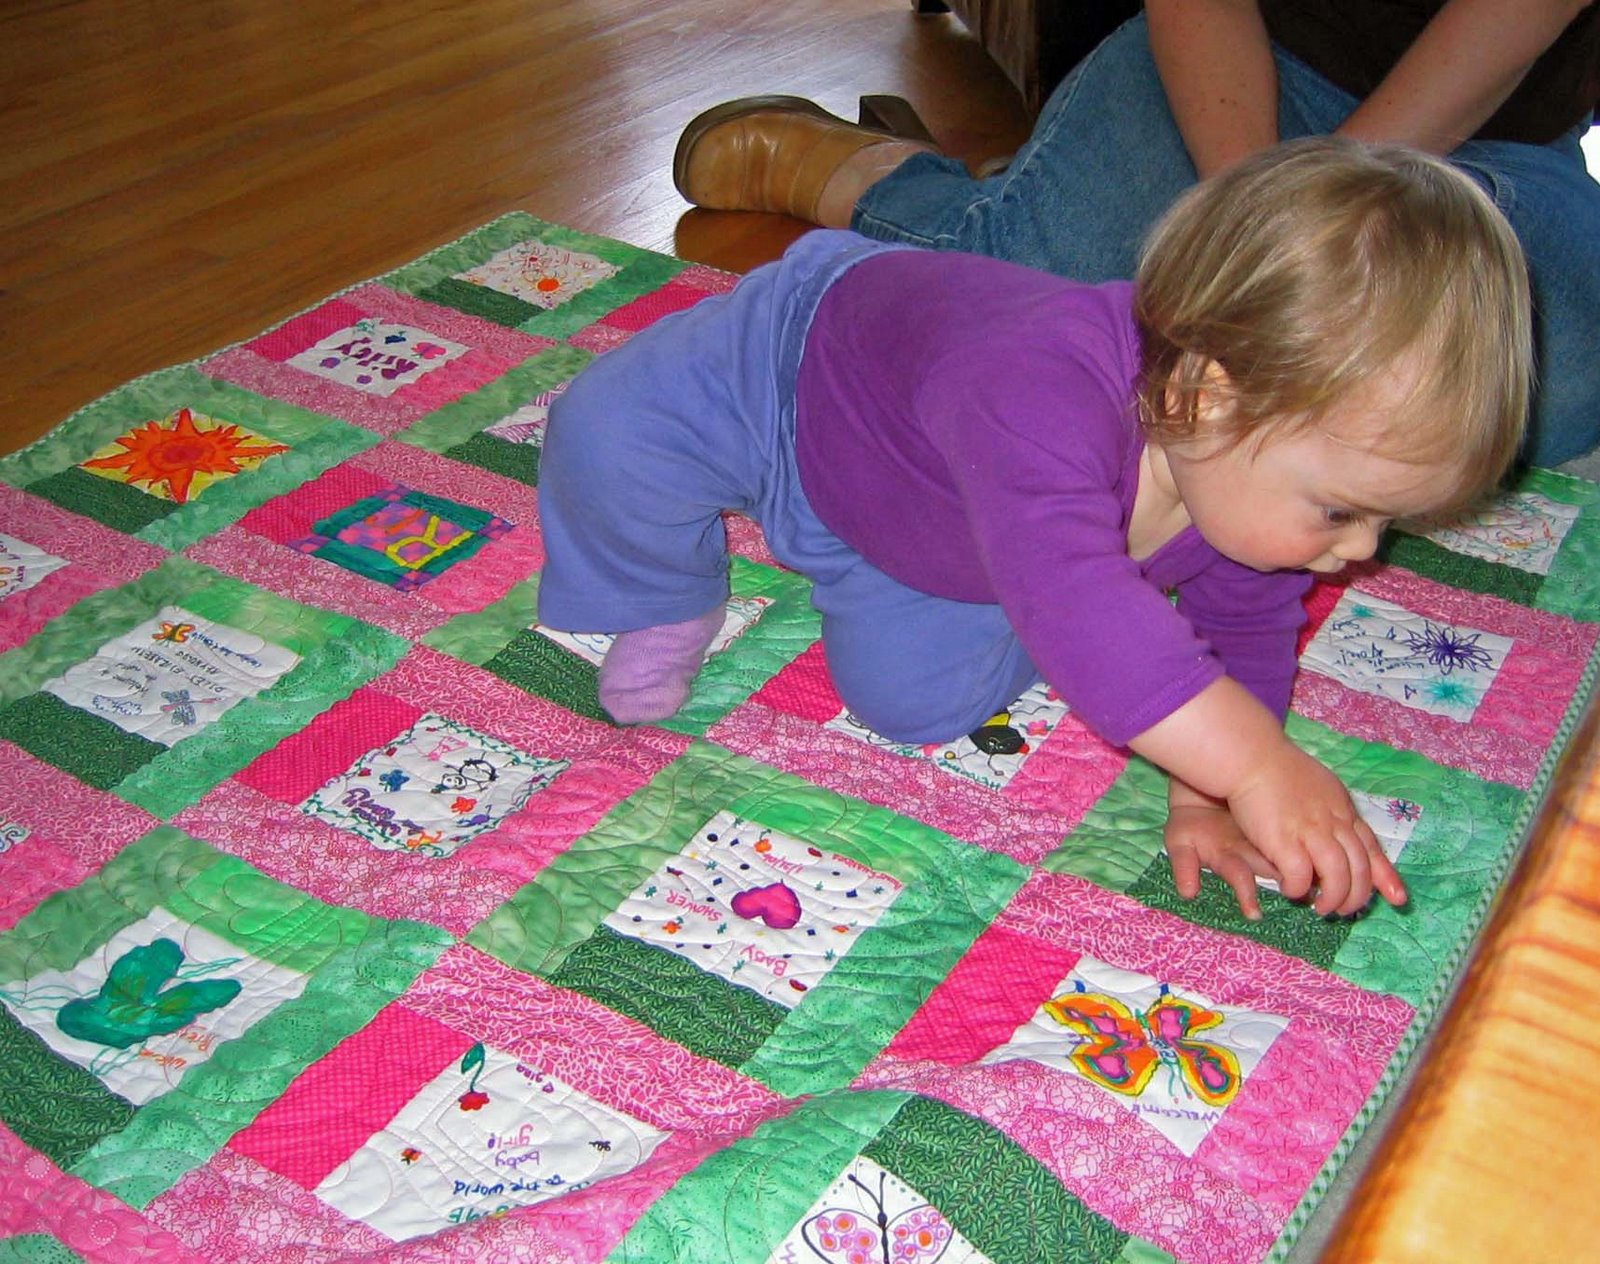 [Riley+and+her+quilt.jpg]